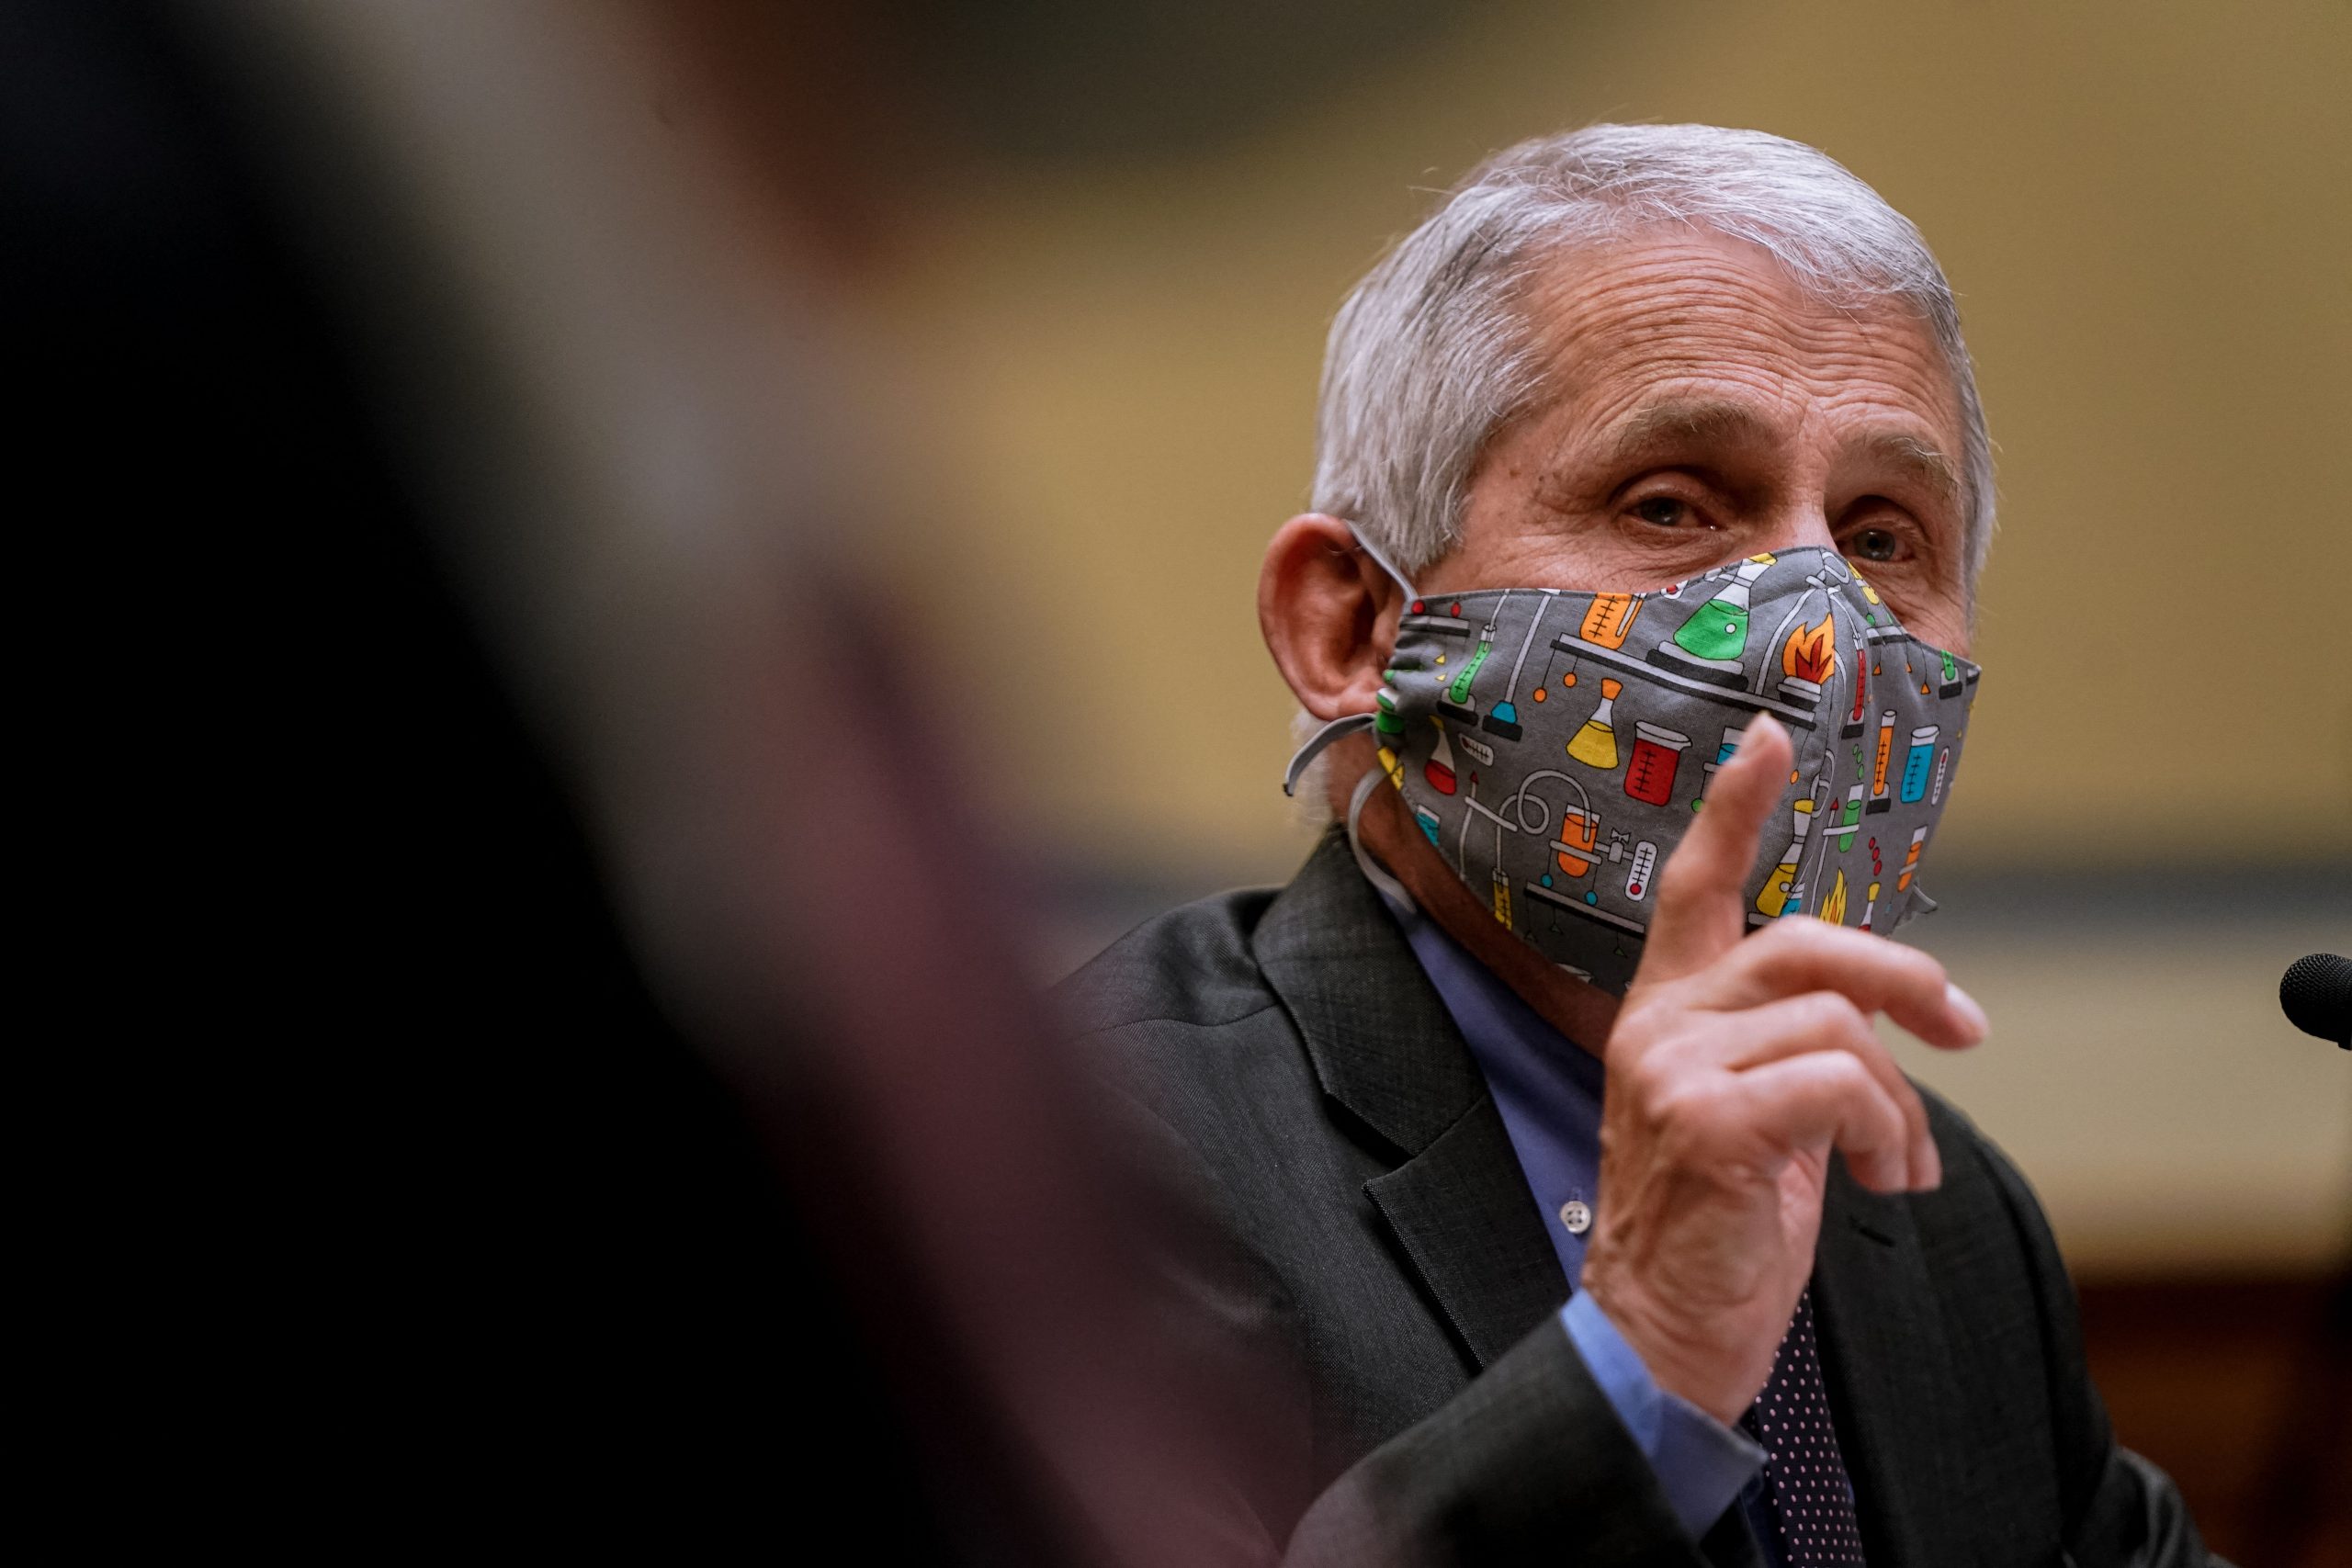 America may get its own COVID variant, Anthony Fauci warns